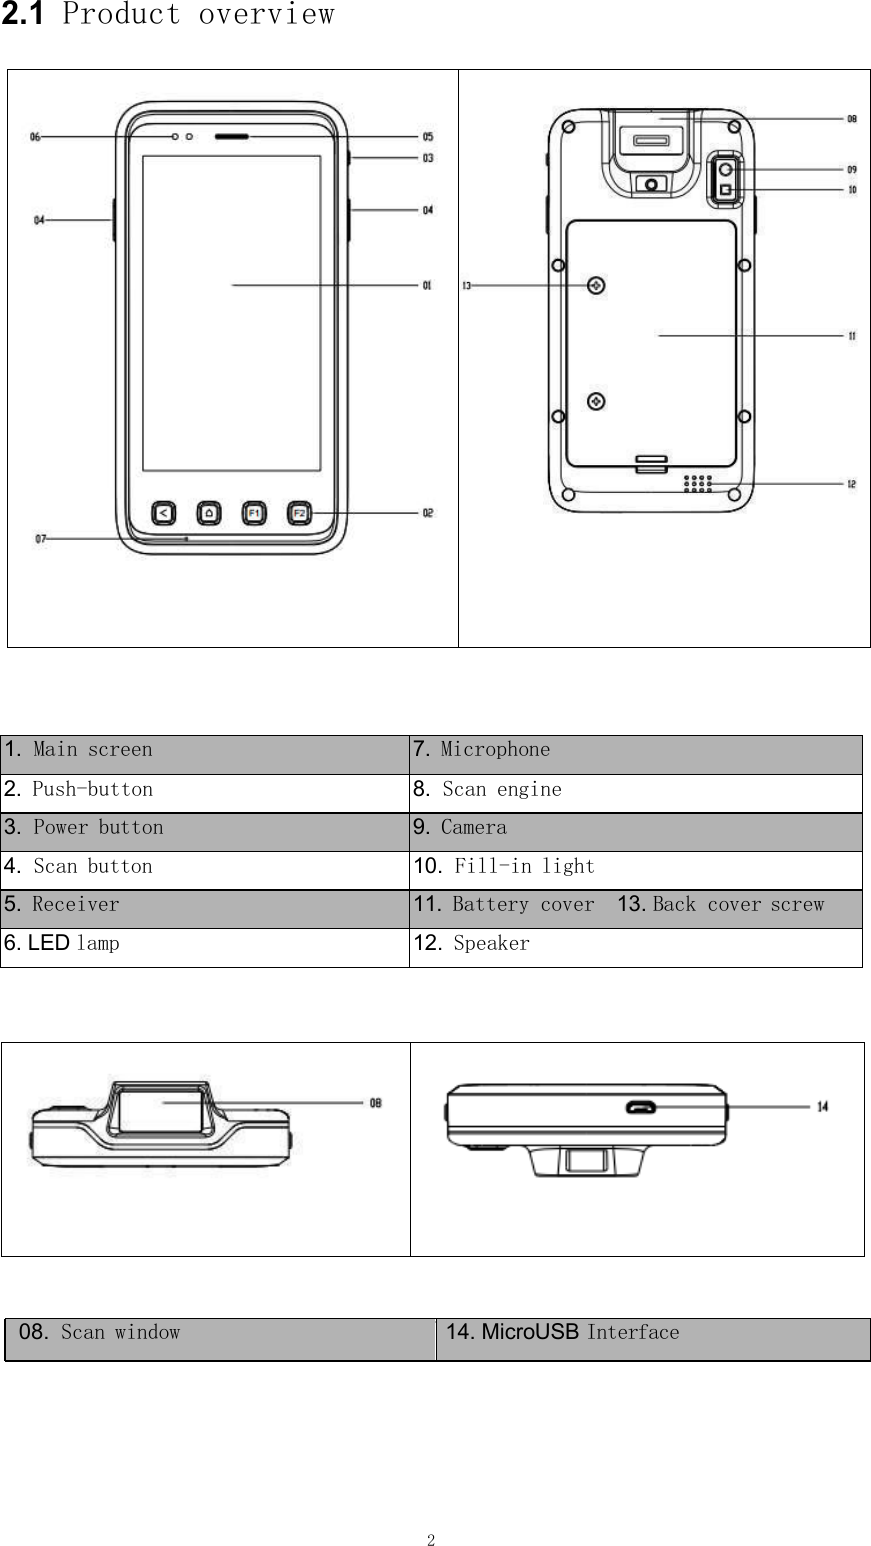 2   2.1  Product overview                                       1.  Main screen    7.  Microphone   2.  Push-button    8.  Scan engine   3.  Power button    9.  Camera   4.  Scan button    10.  Fill-in light   5.  Receiver    11.  Battery cover  13. Back cover screw   6. LED lamp    12.  Speaker              08.  Scan window    14. MicroUSB Interface   